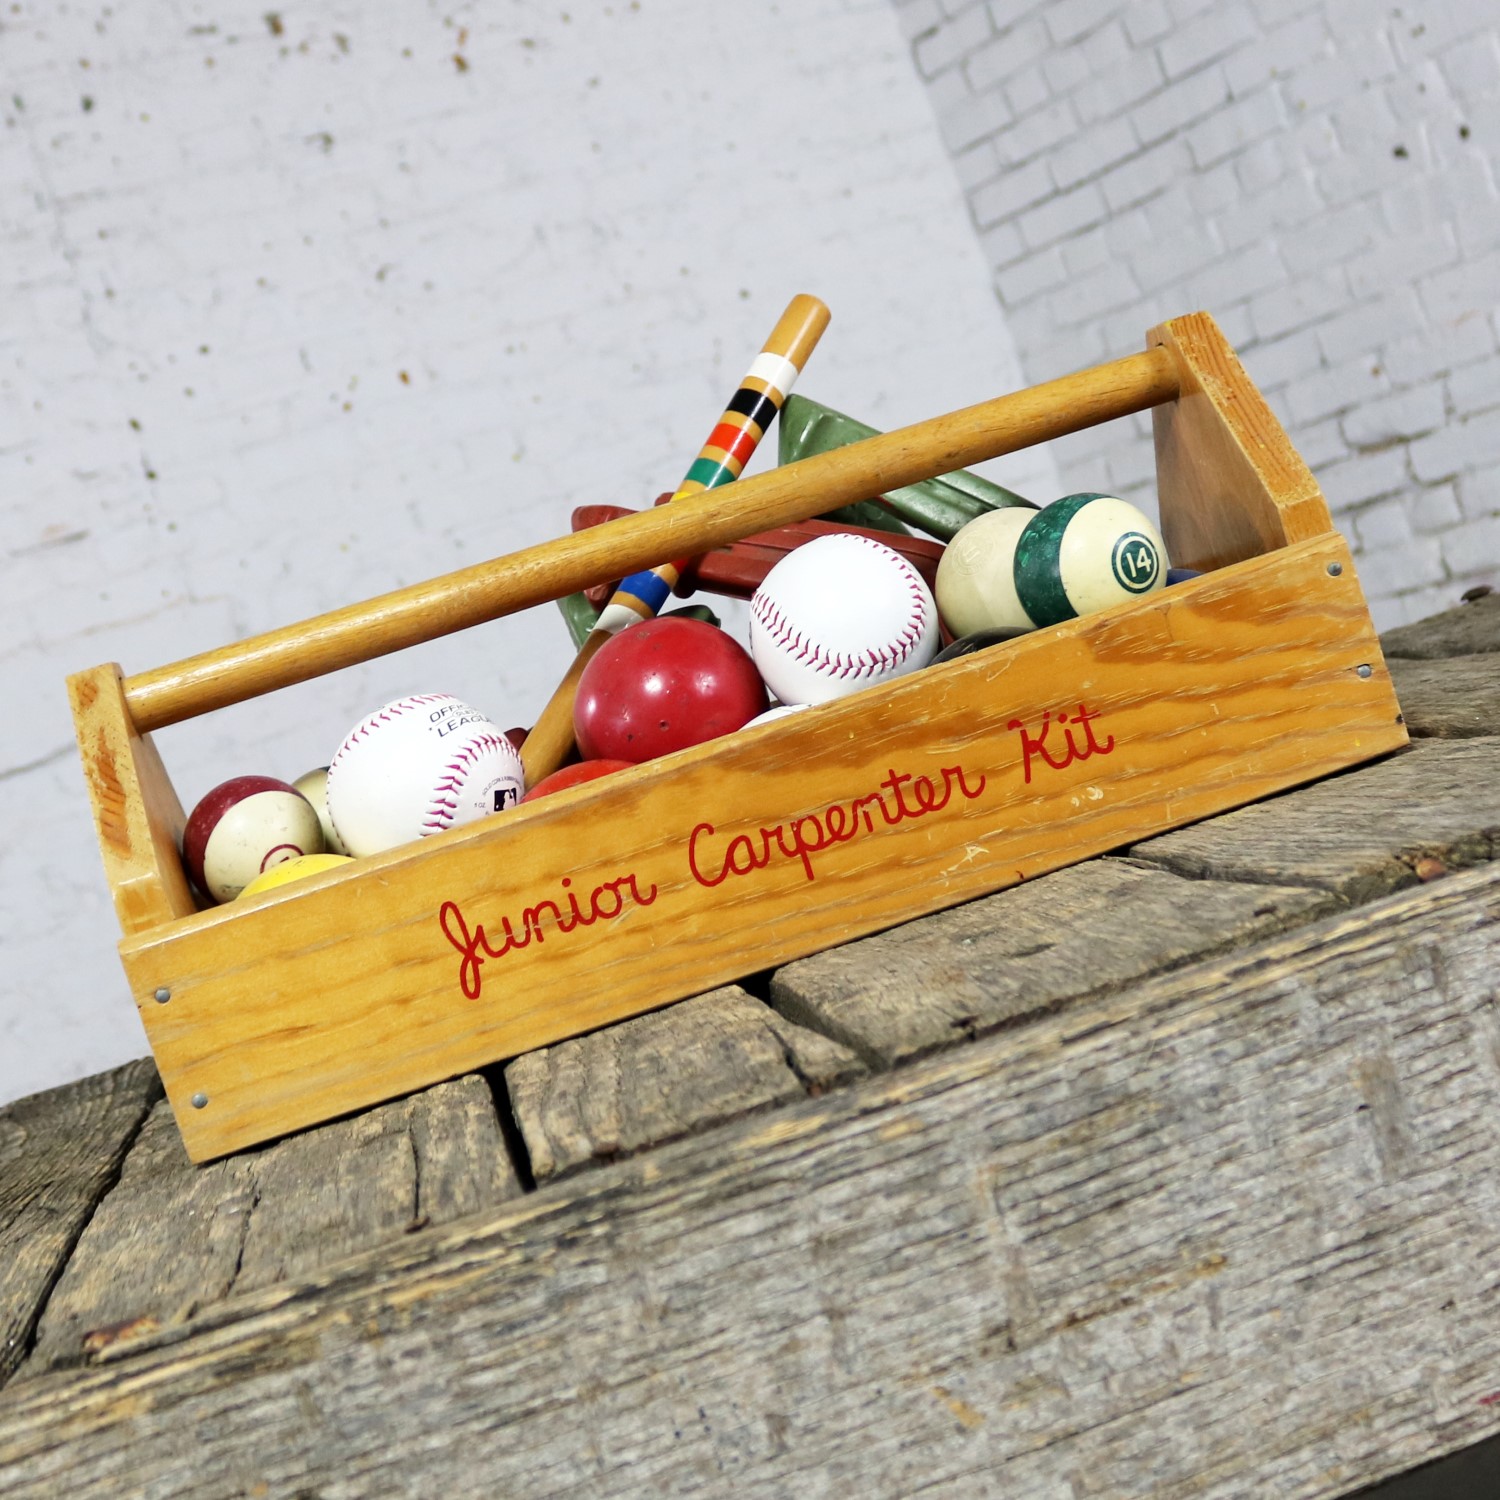 Object d ’Art Centerpiece Junior Carpenter Kit Tool Box with Balls and Horseshoes